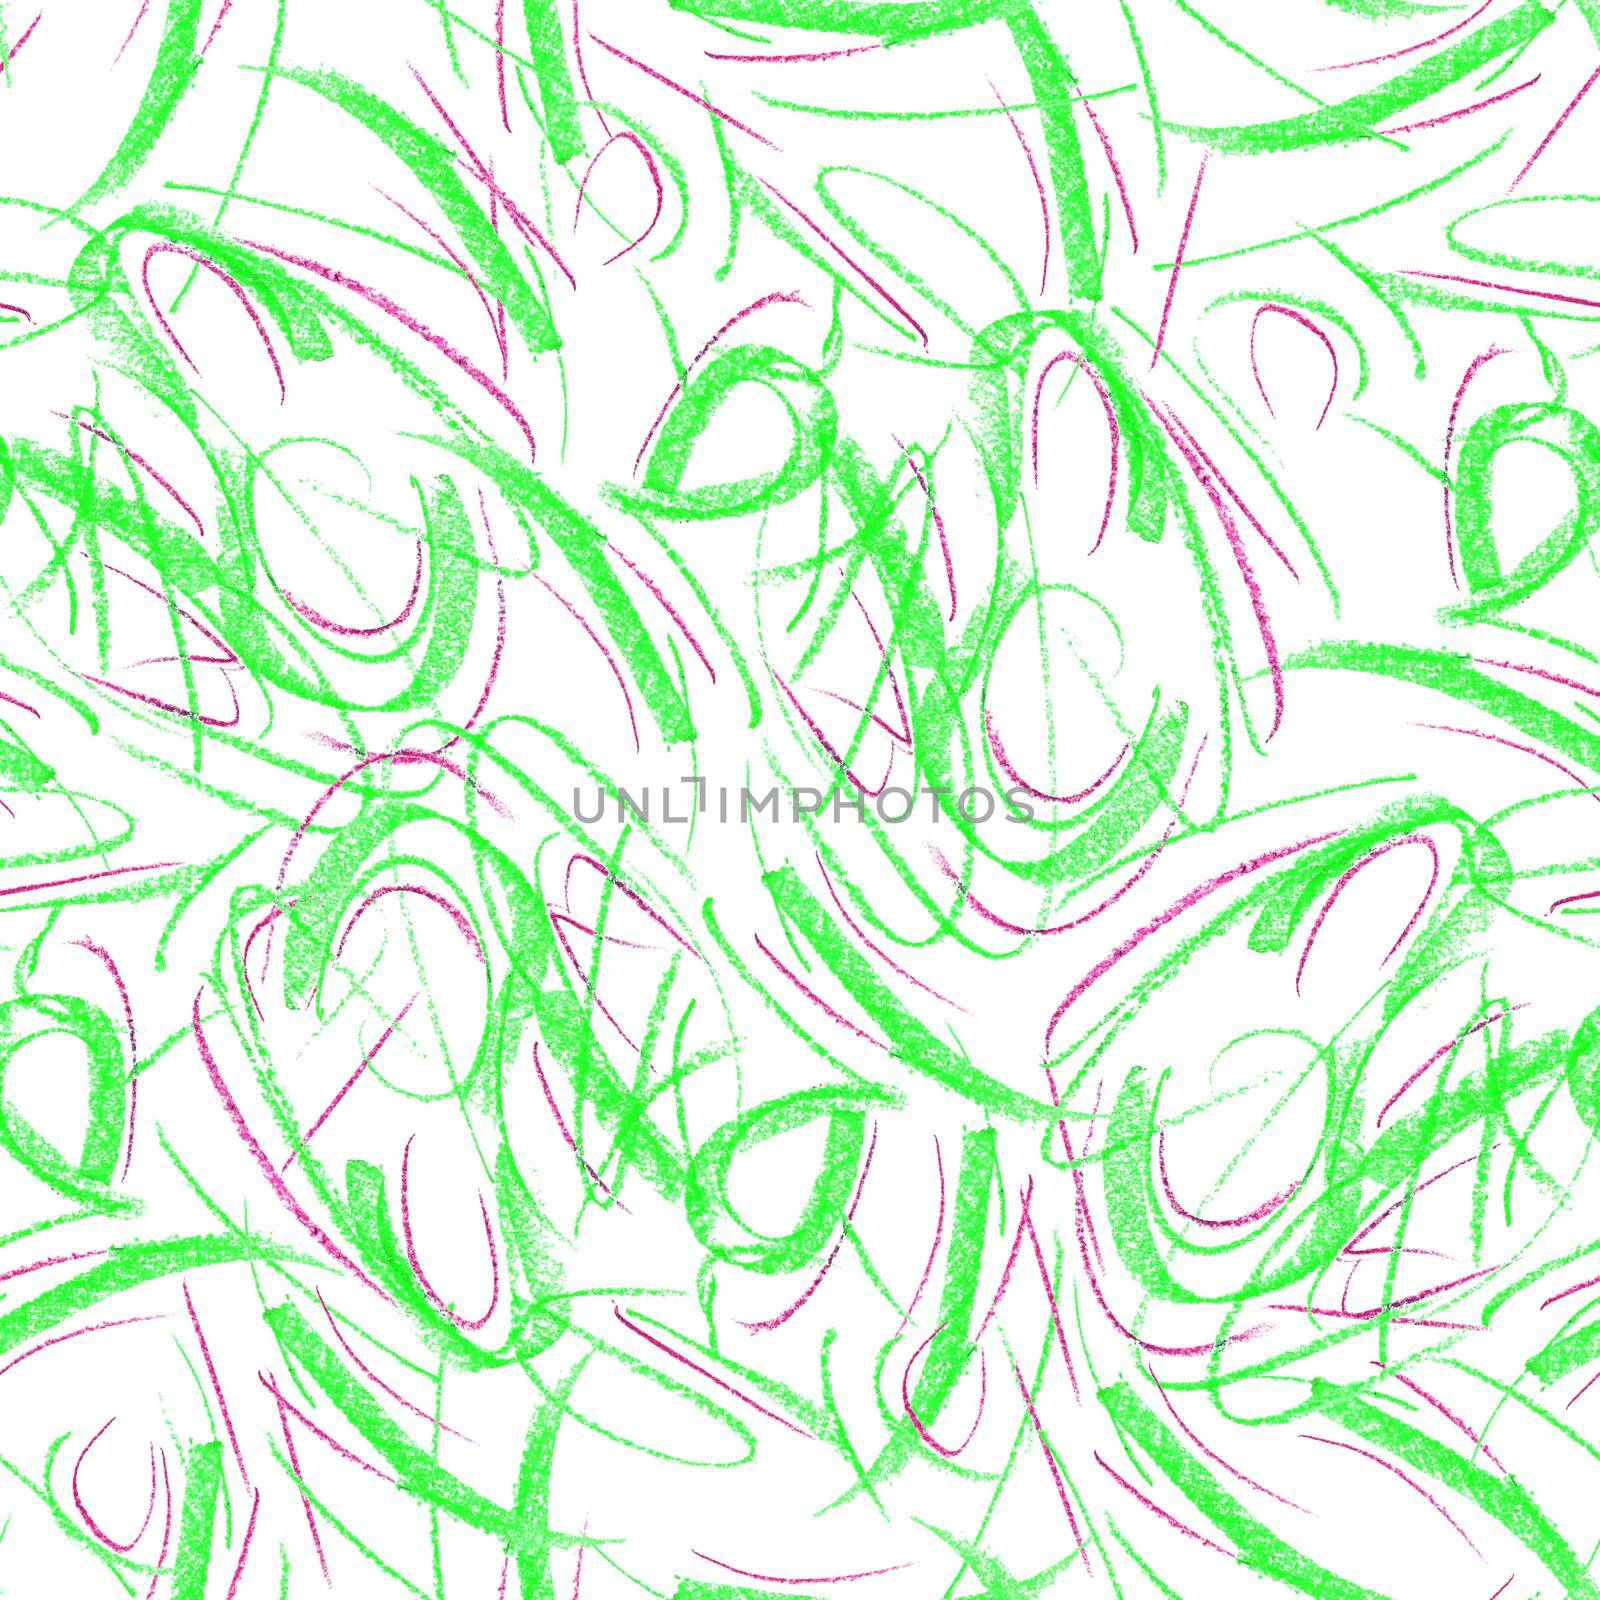 Wavy and swirled chalk strokes seamless pattern. Green and pink paint freehand scribbles, lines, squiggle pattern. Abstract wallpaper design, textile print